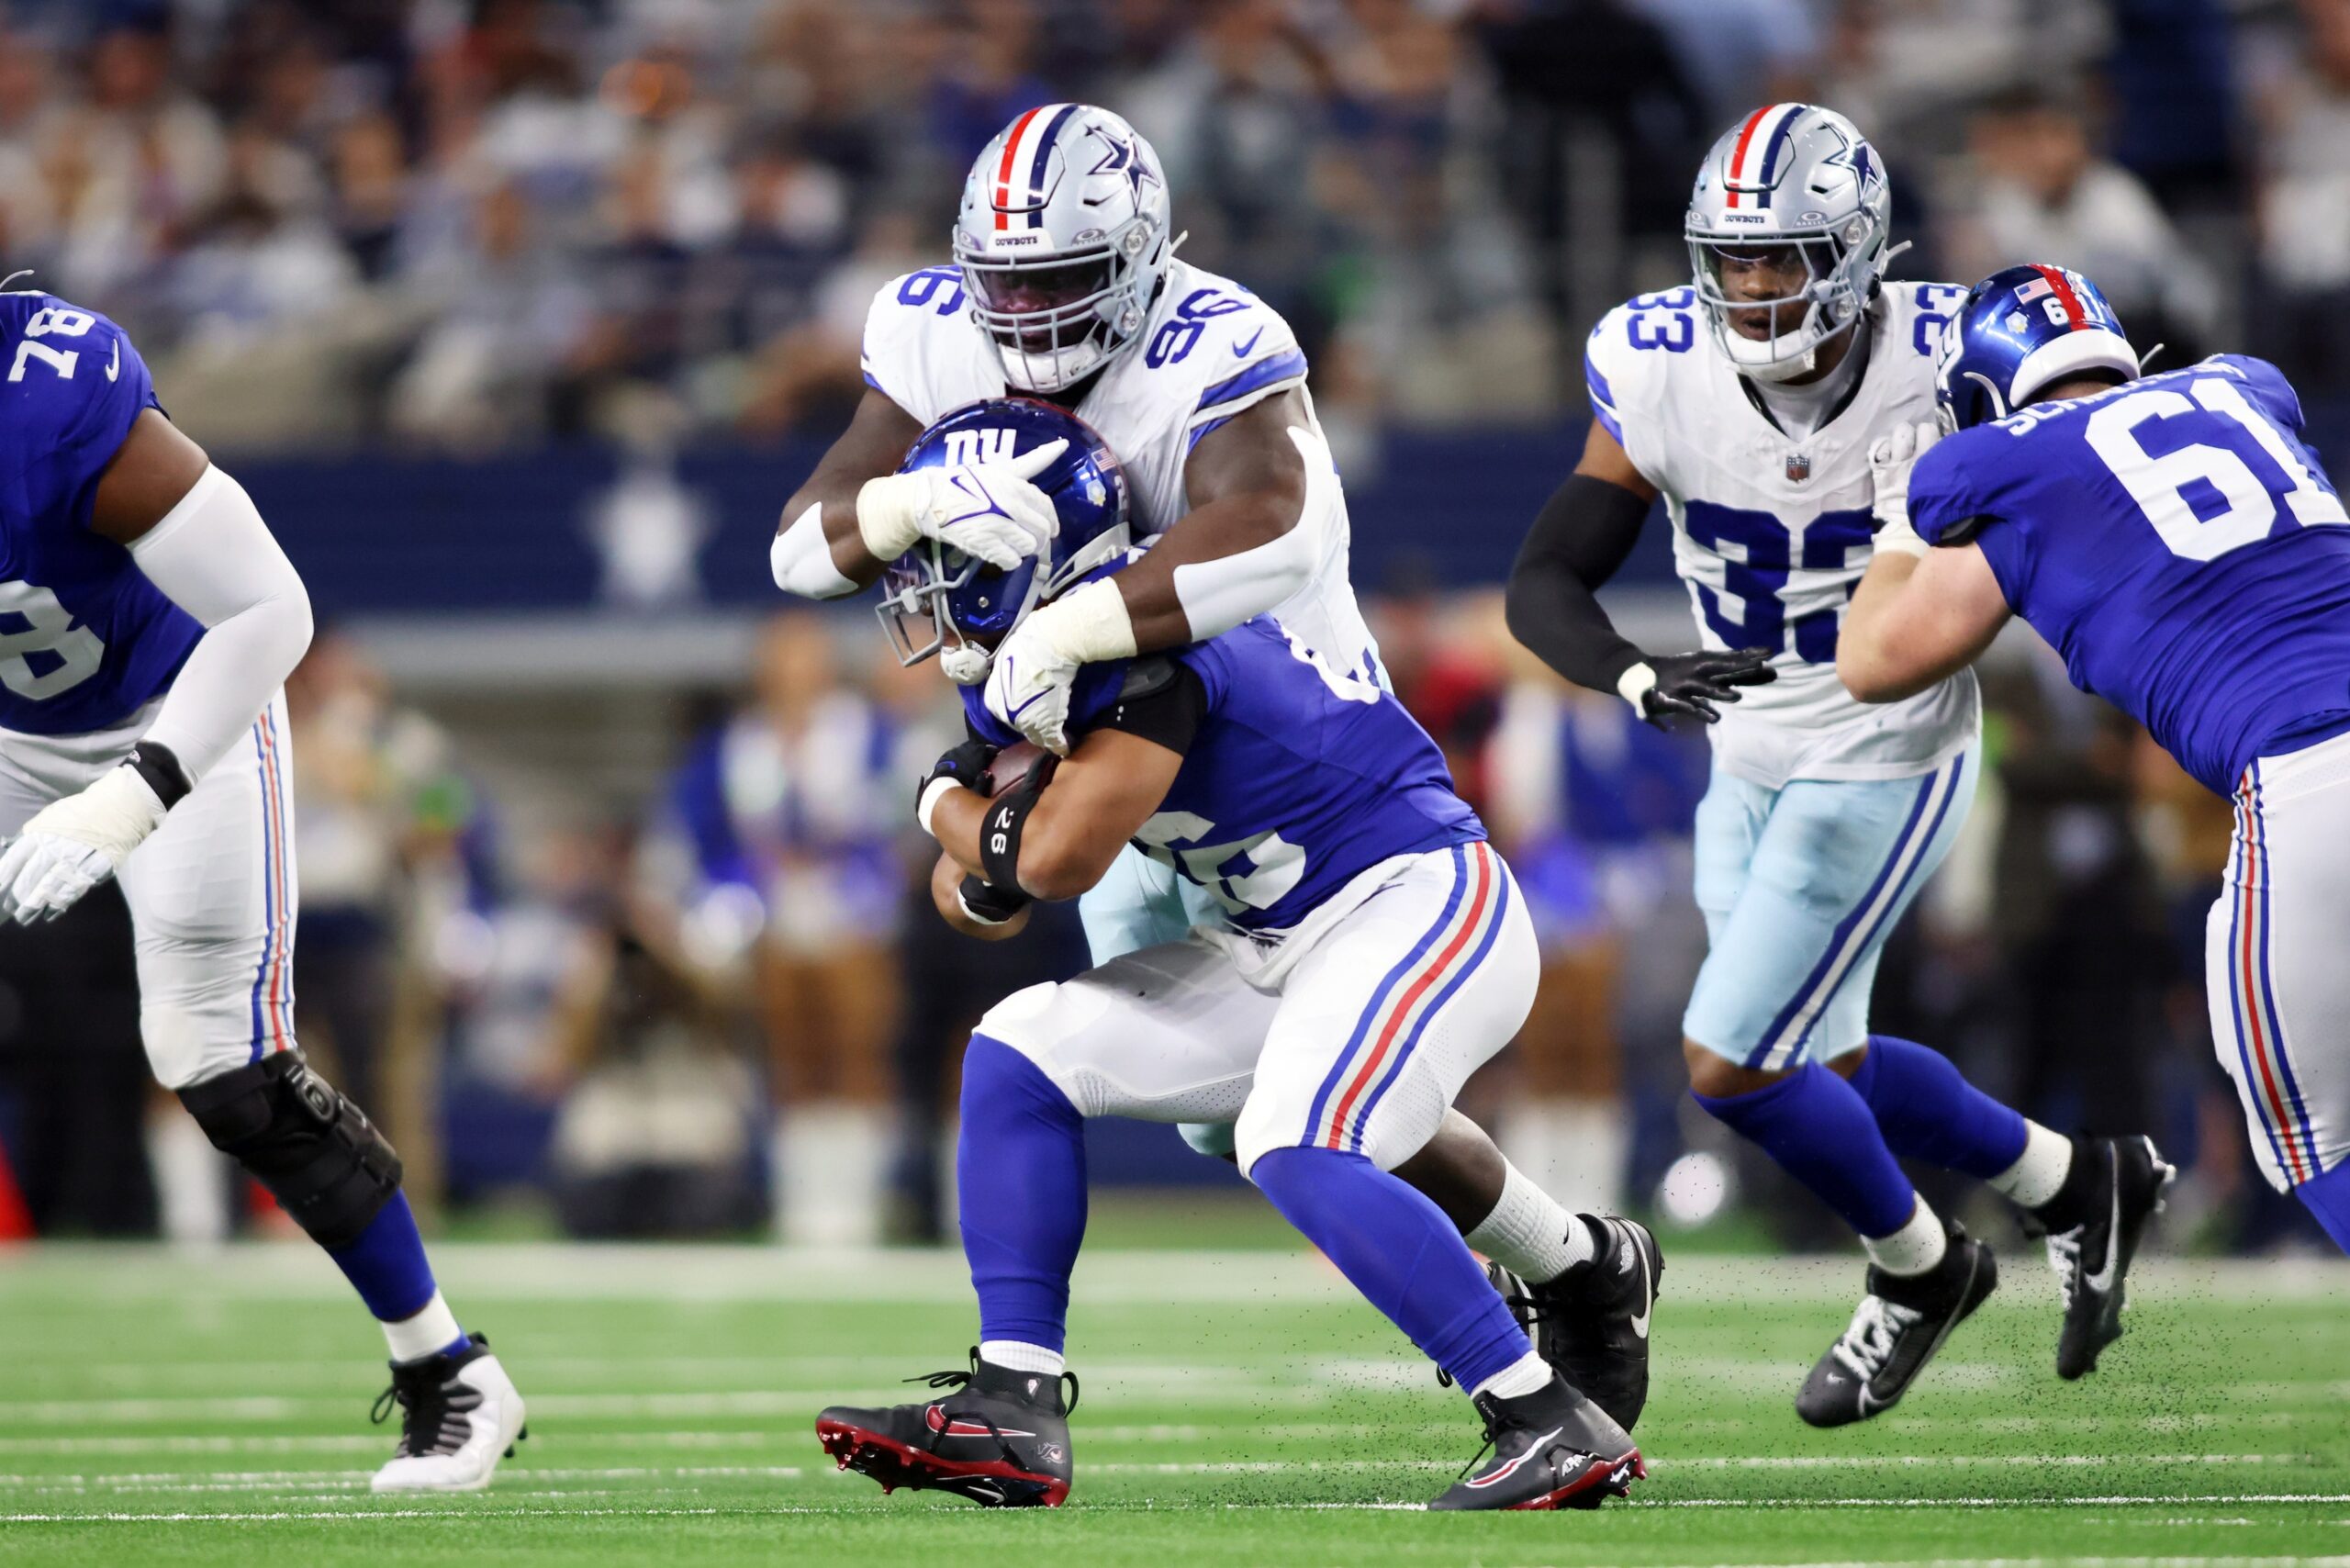 New York Giants Fans Upset: Footage Sparks Cowboys' Ejection